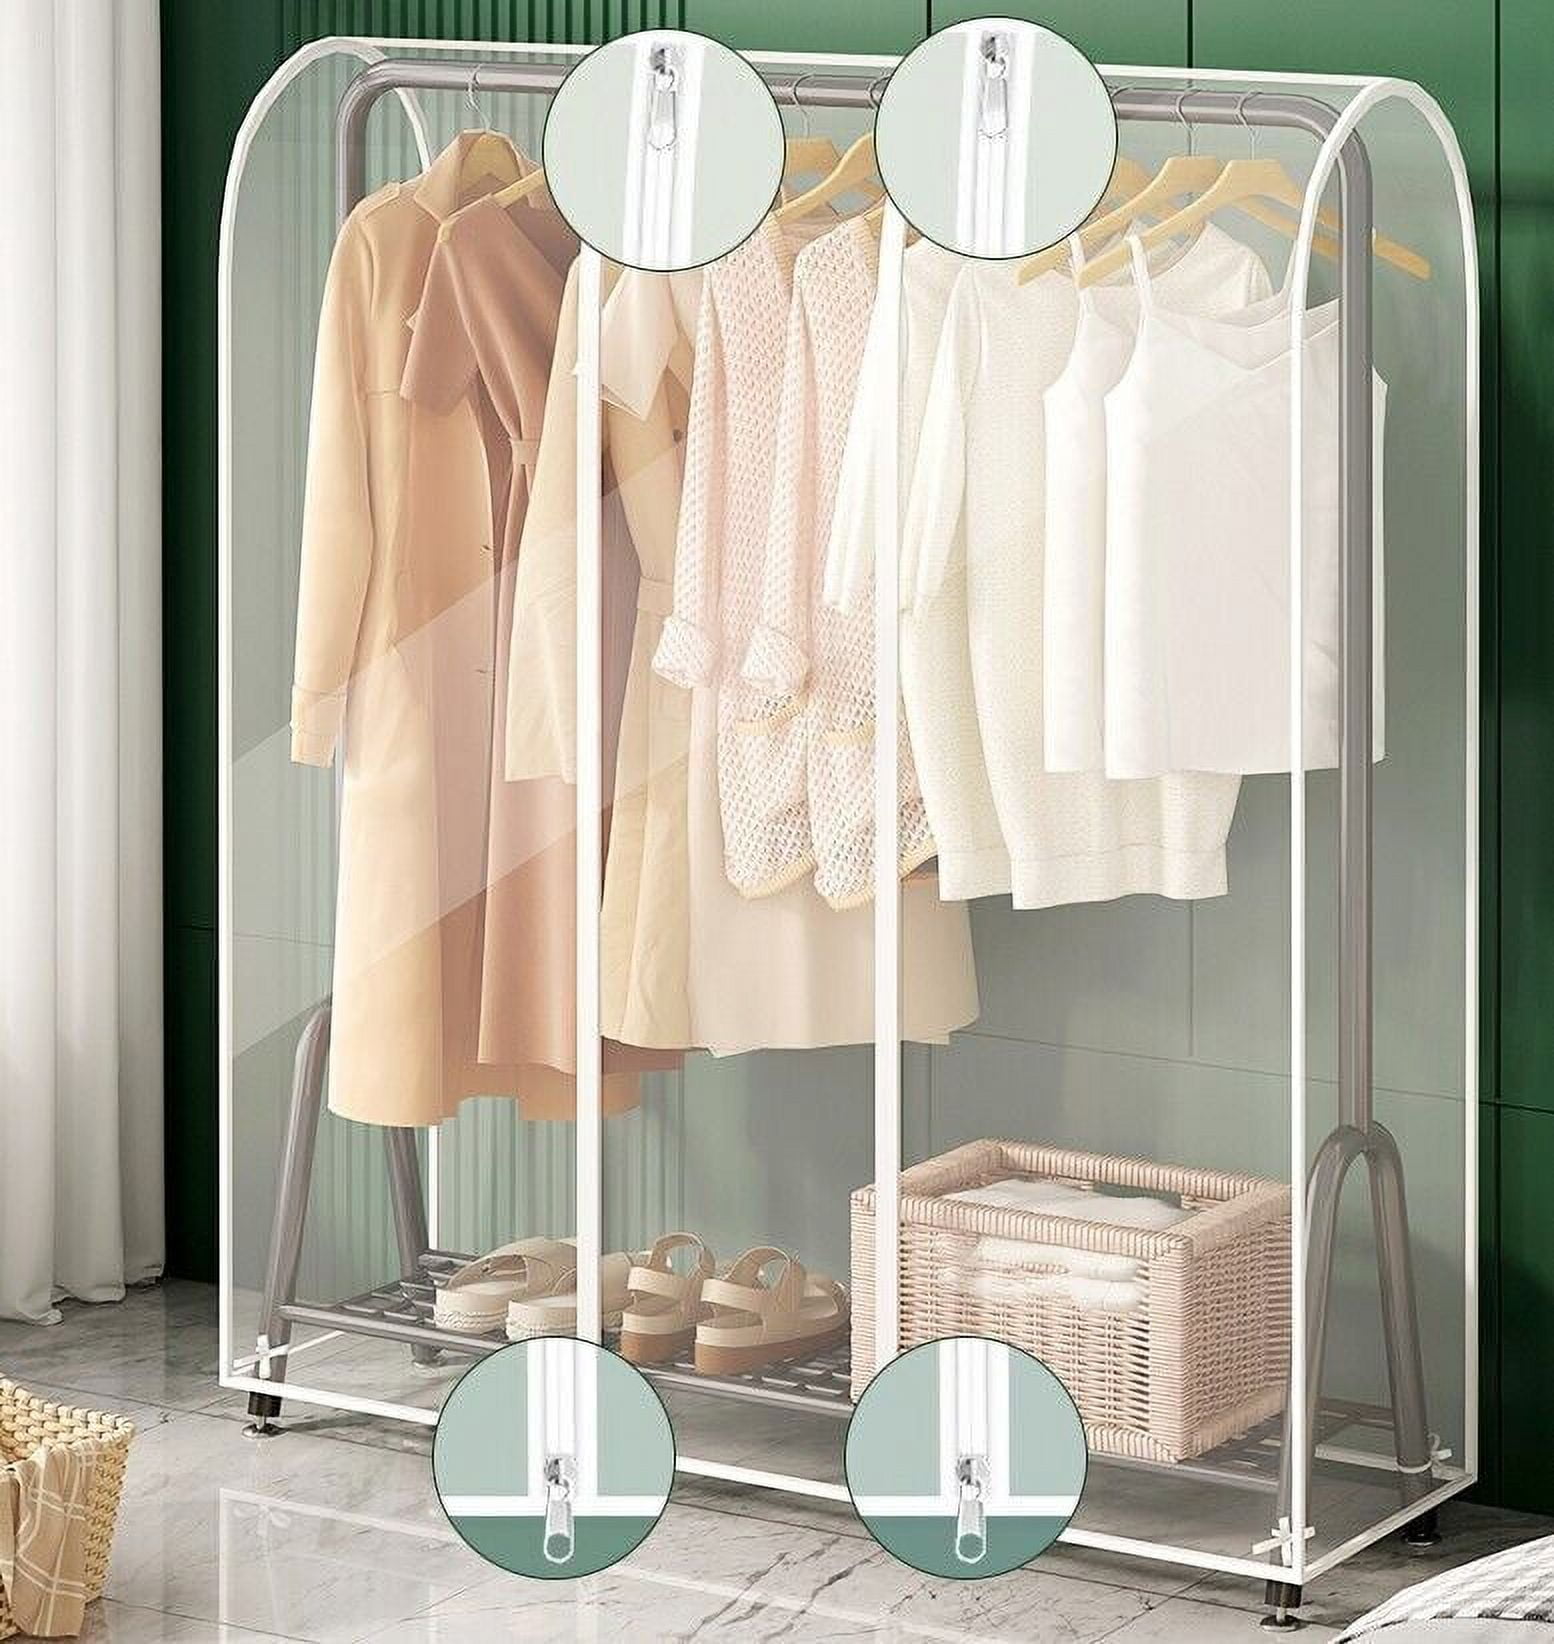 TOPCHANCES Garment Rack Cover, Transparent Clothes Rail Cover with 2 ...